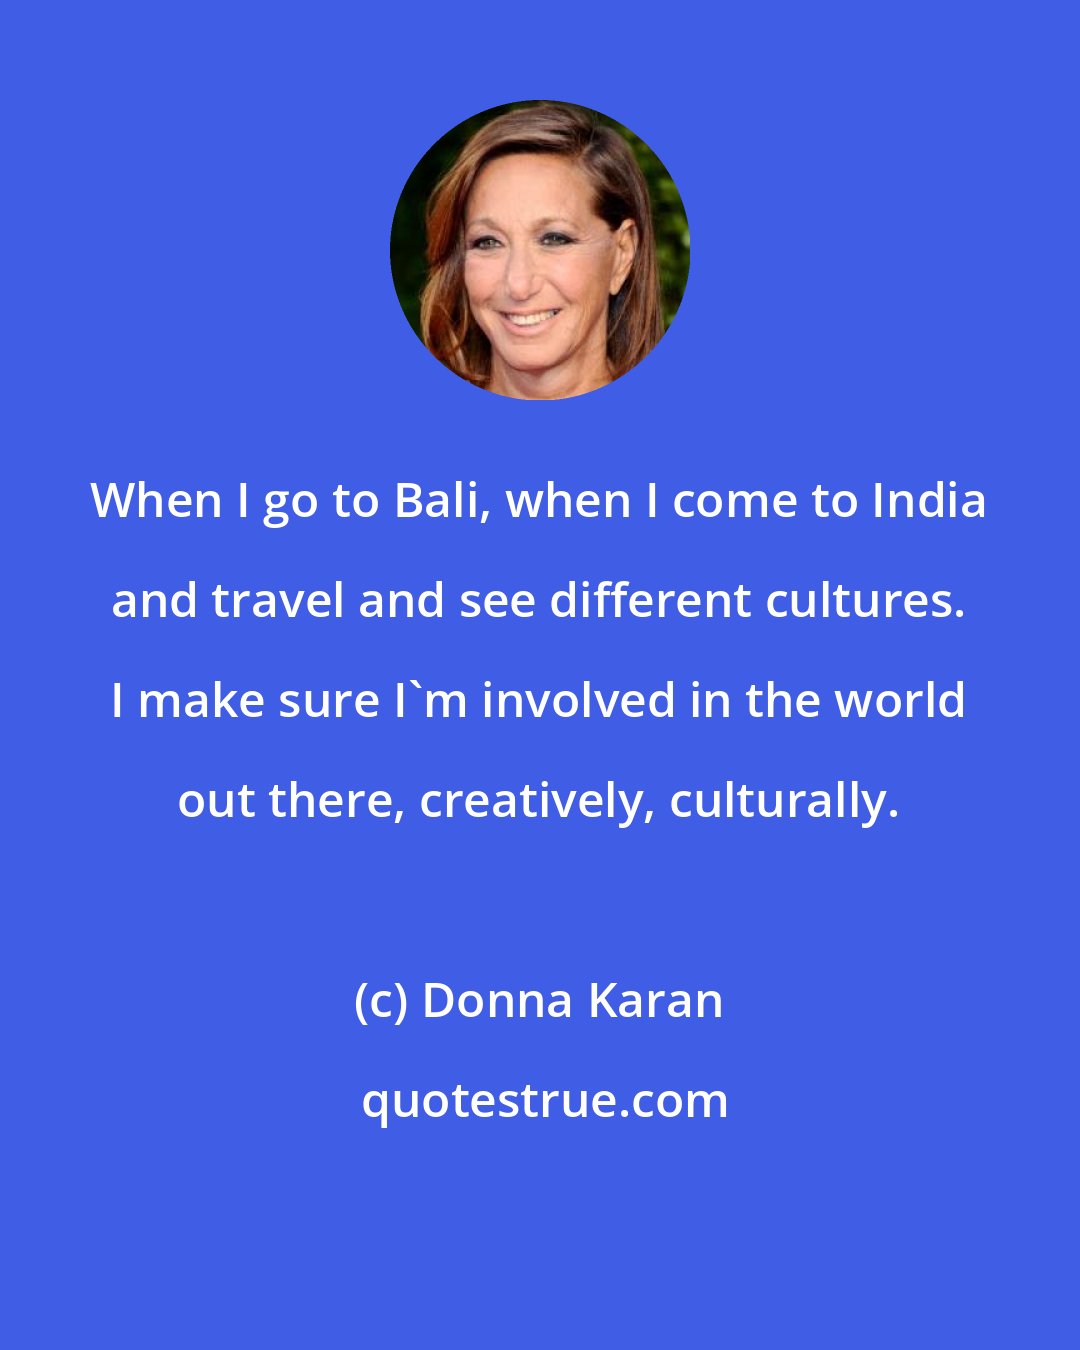 Donna Karan: When I go to Bali, when I come to India and travel and see different cultures. I make sure I'm involved in the world out there, creatively, culturally.